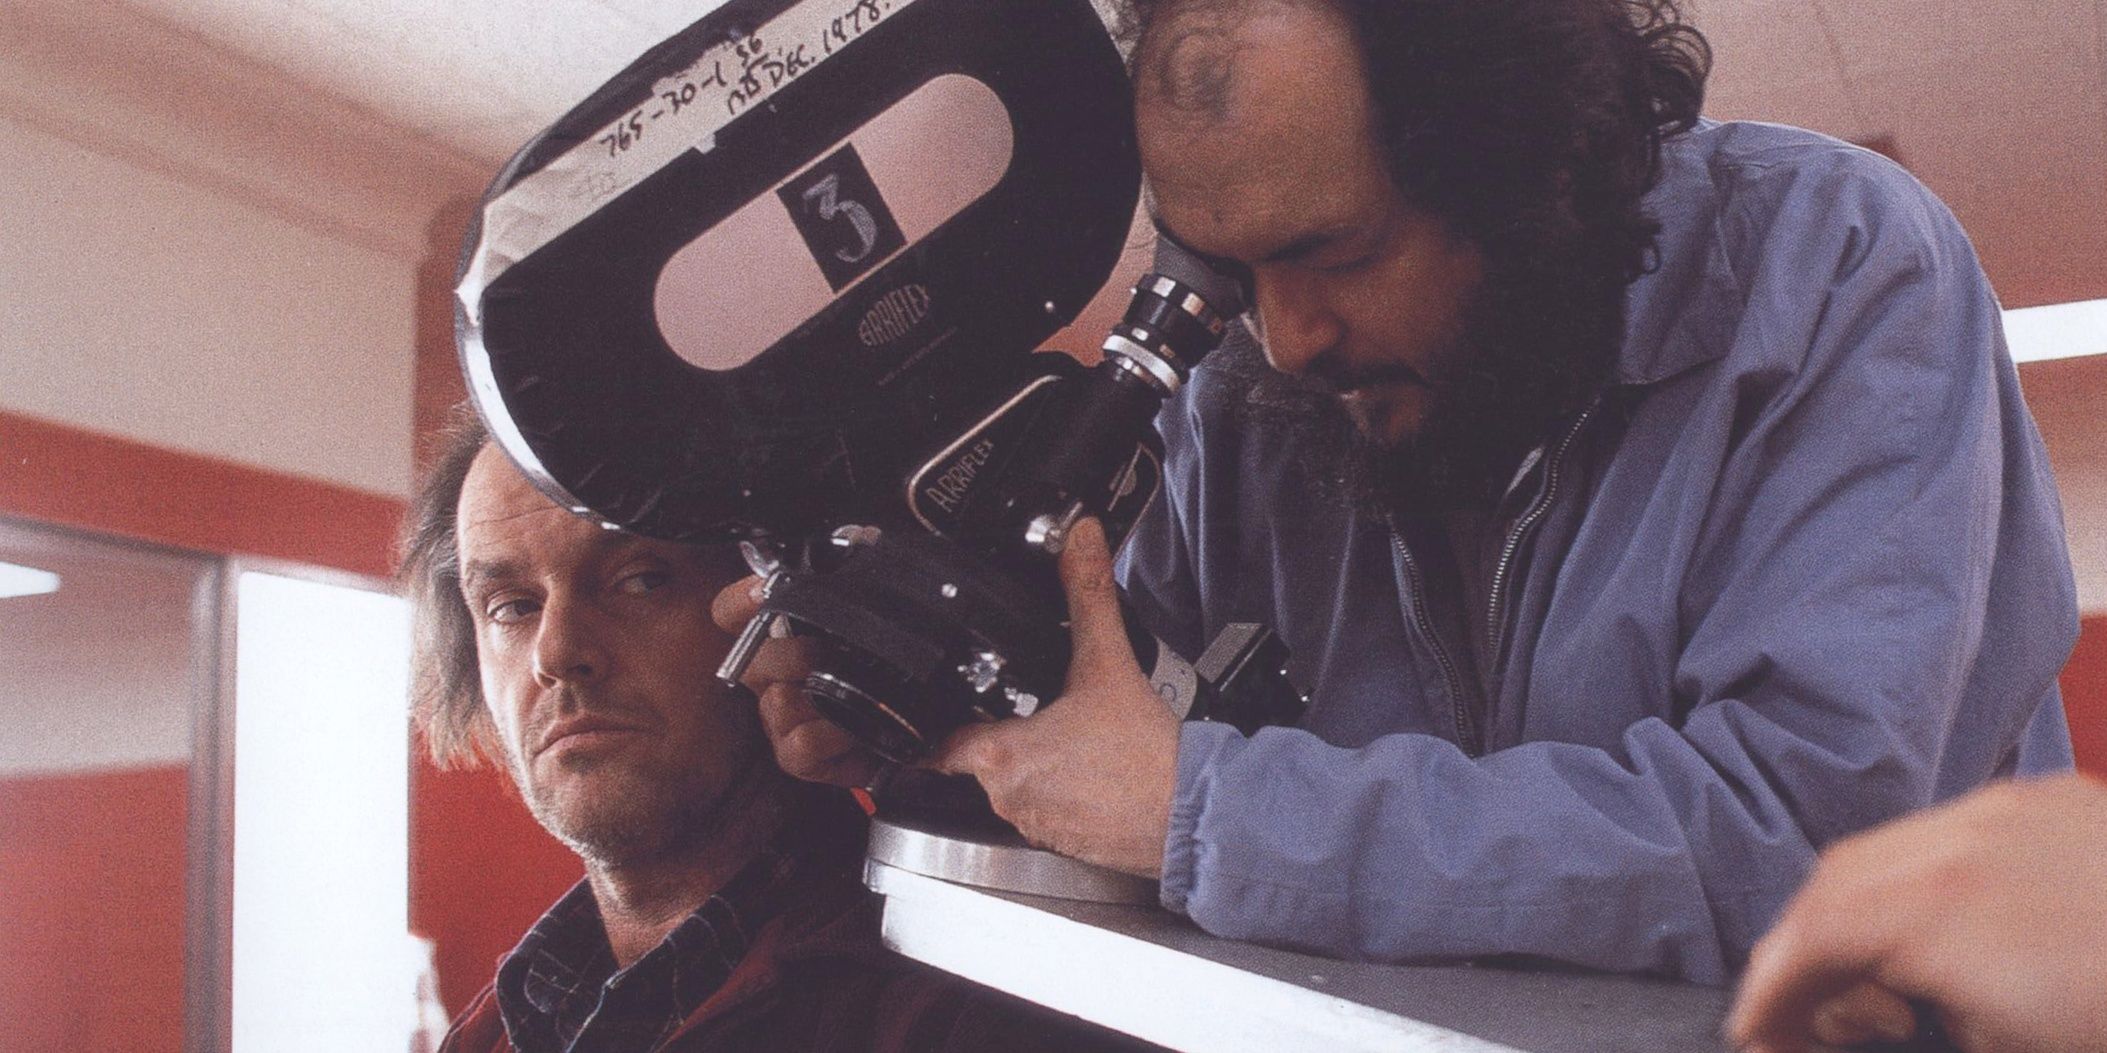 Stanley Kubrick filming a scene from The Shining next to Jack Nicholson